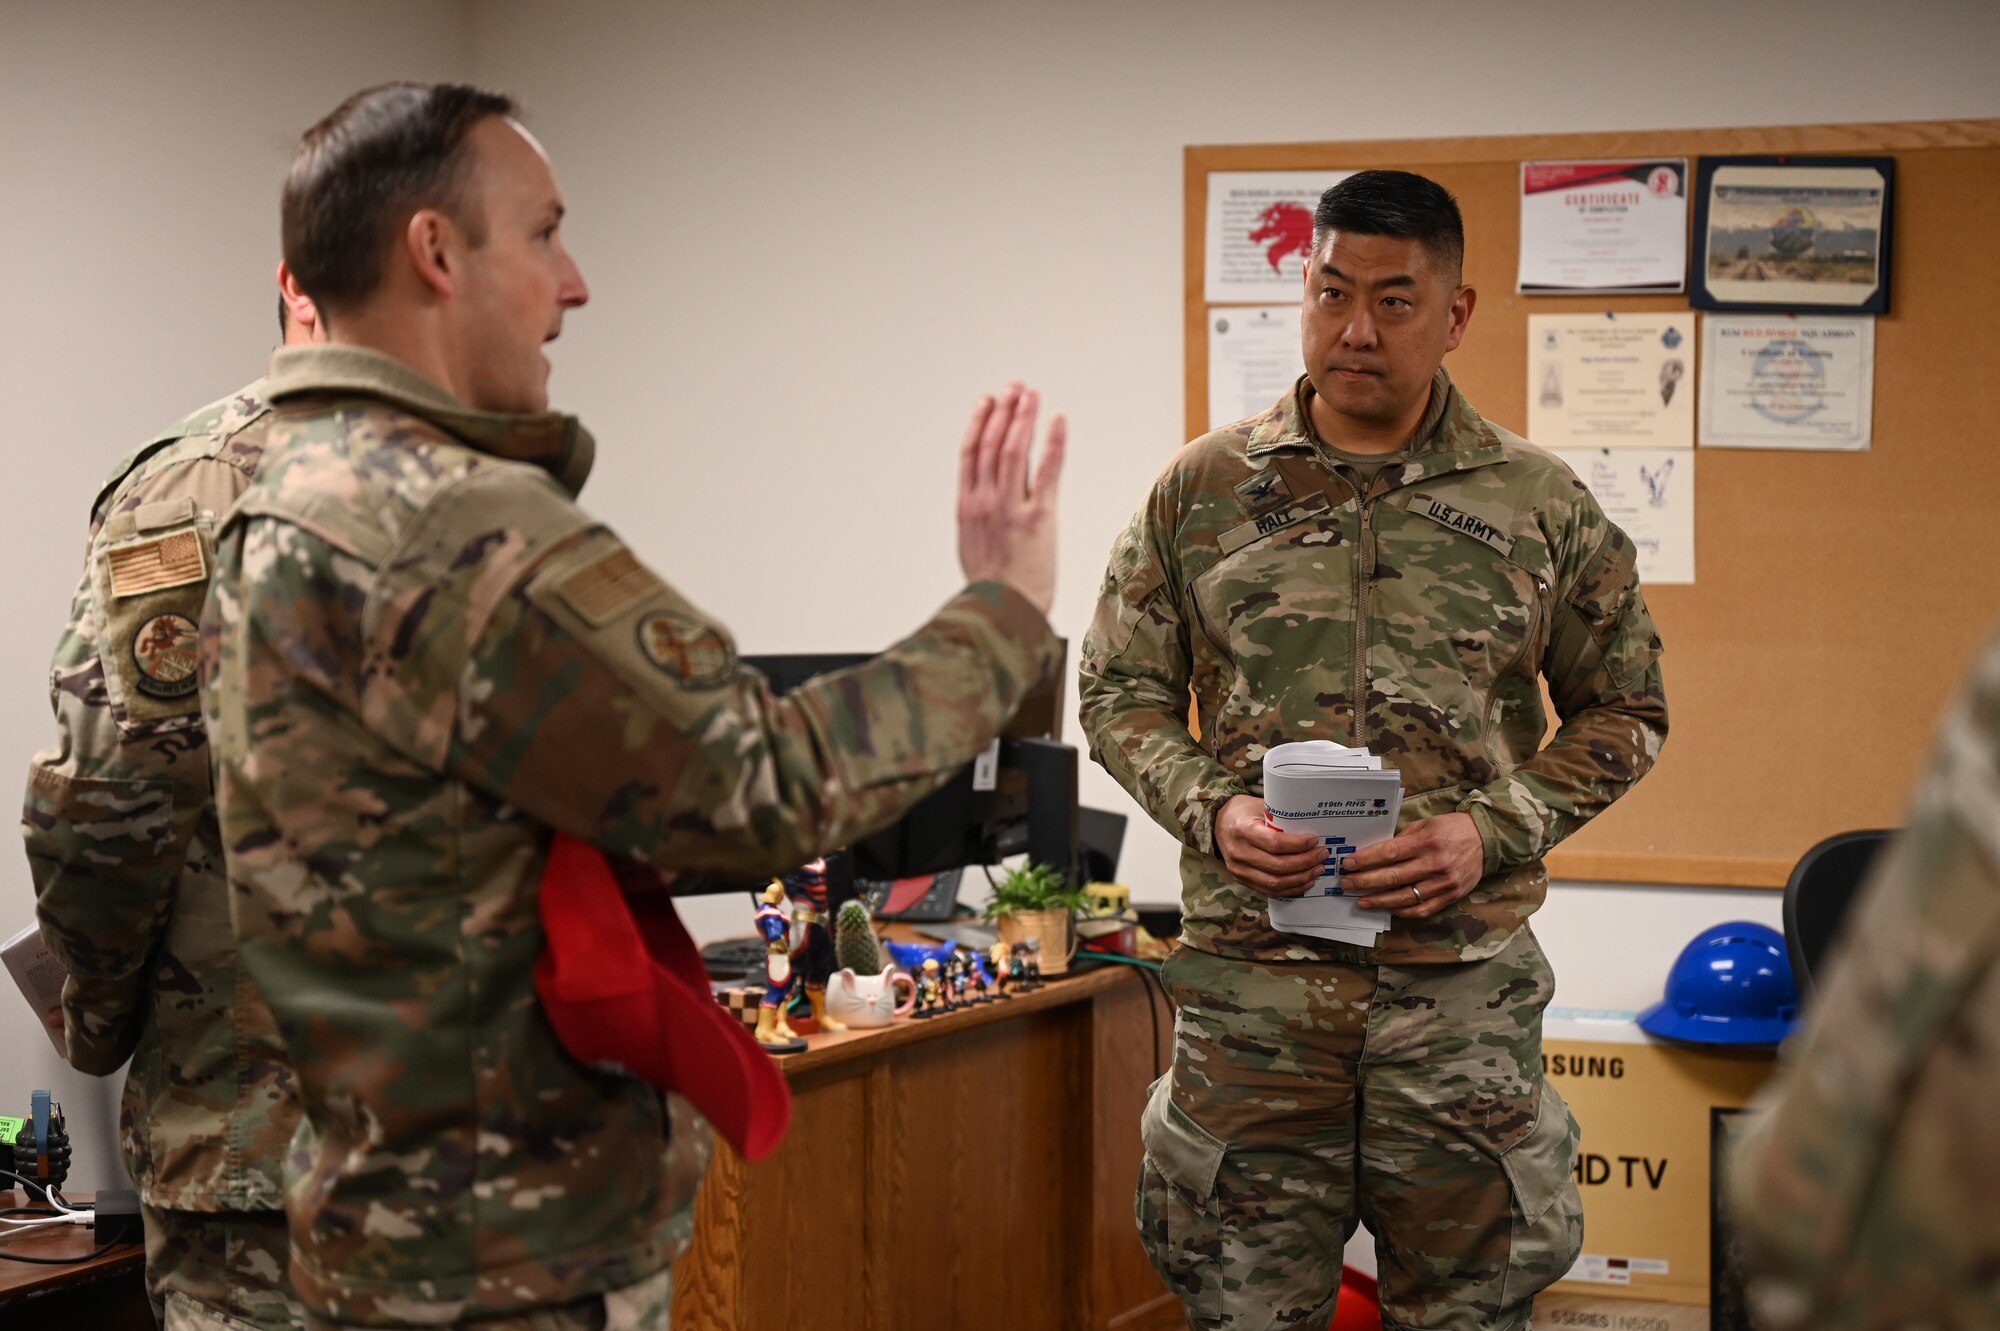 Two men in military uniform stand in an office and talk.